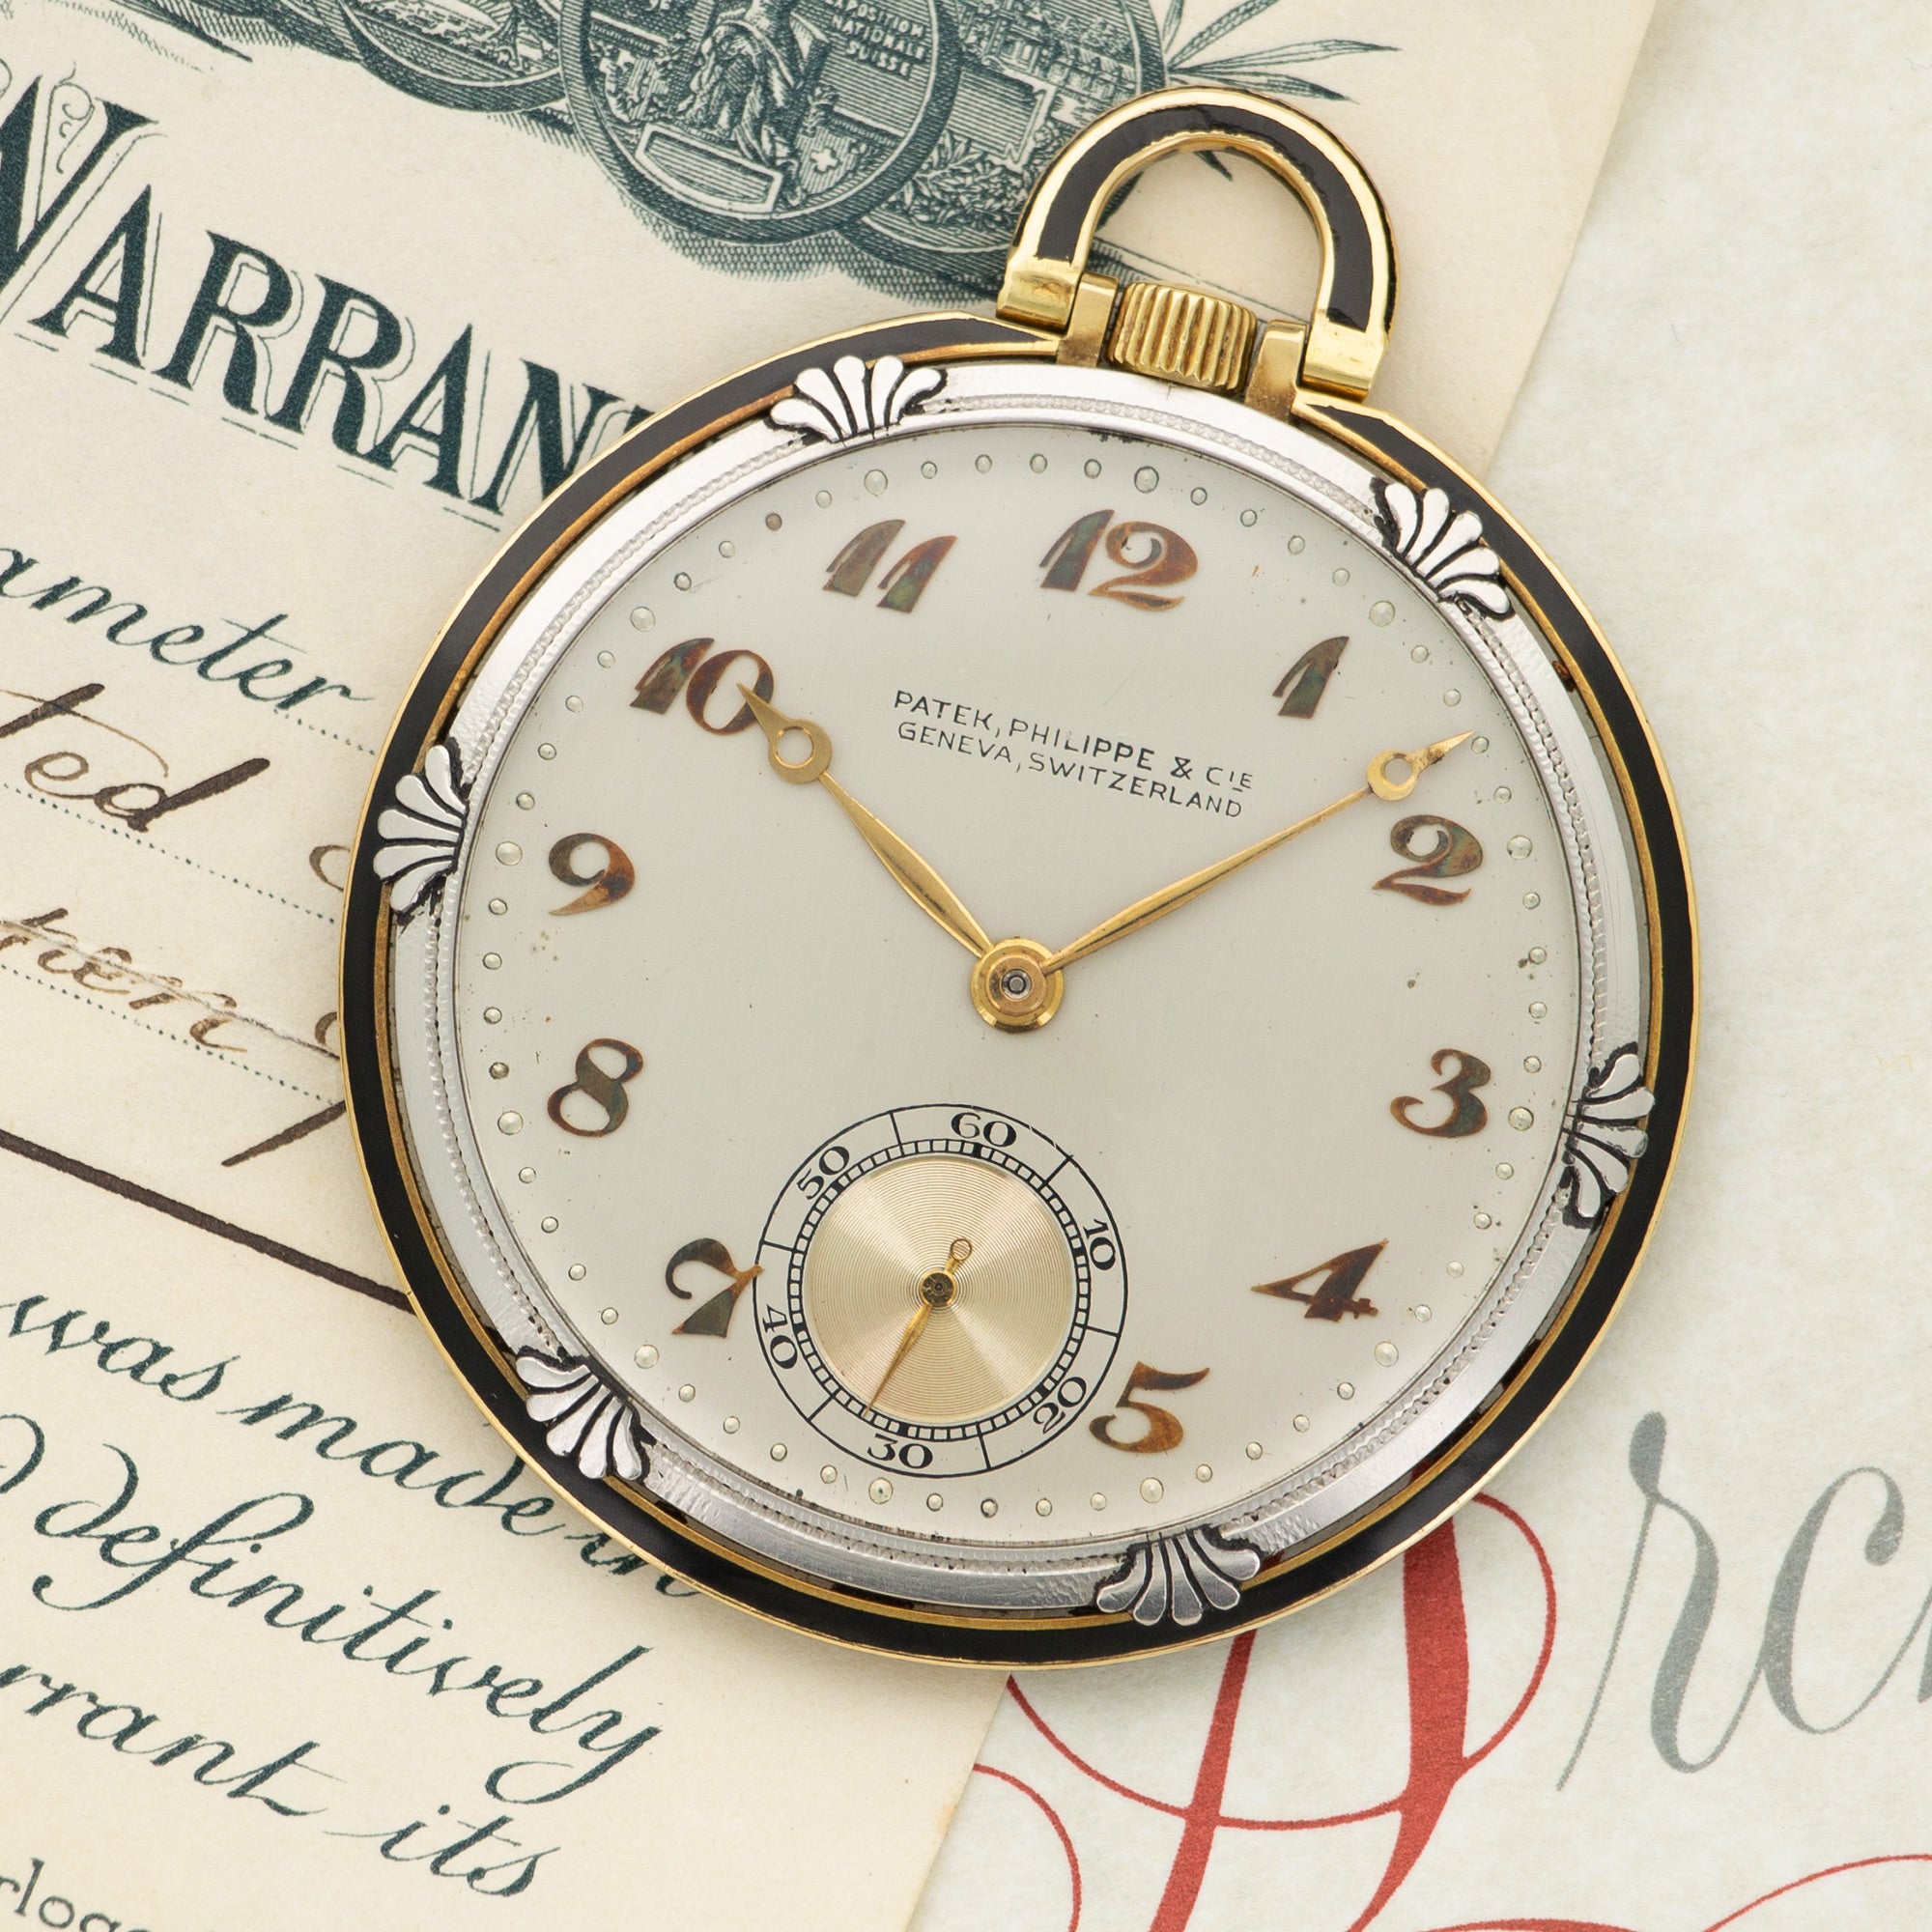 Patek Philippe - Patek Philippe Platinum and Gold Pocket Watch with Original Box and Papers - The Keystone Watches